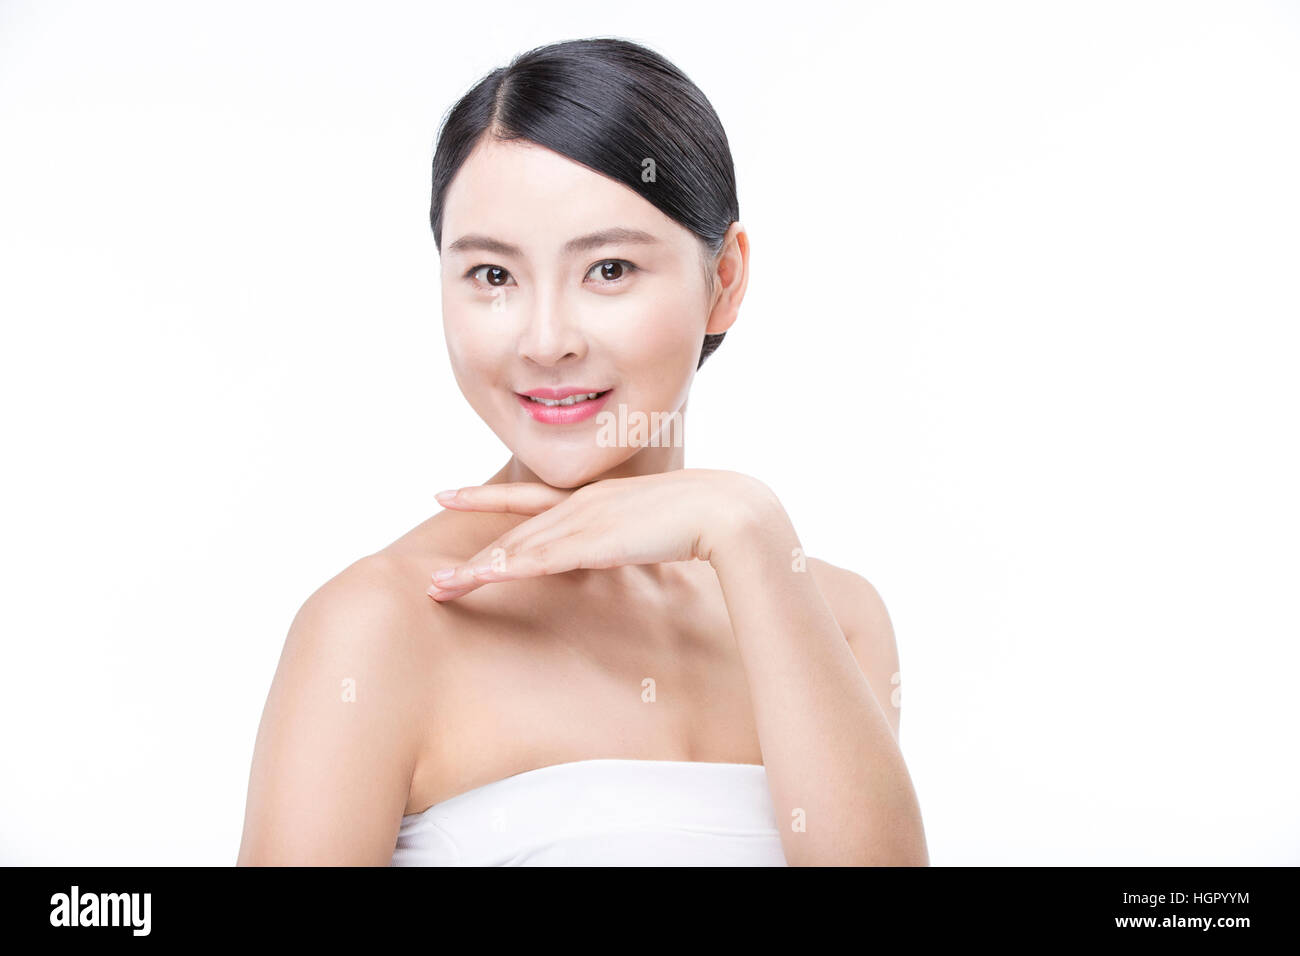 Portrait of young woman in tube top clothes Stock Photo